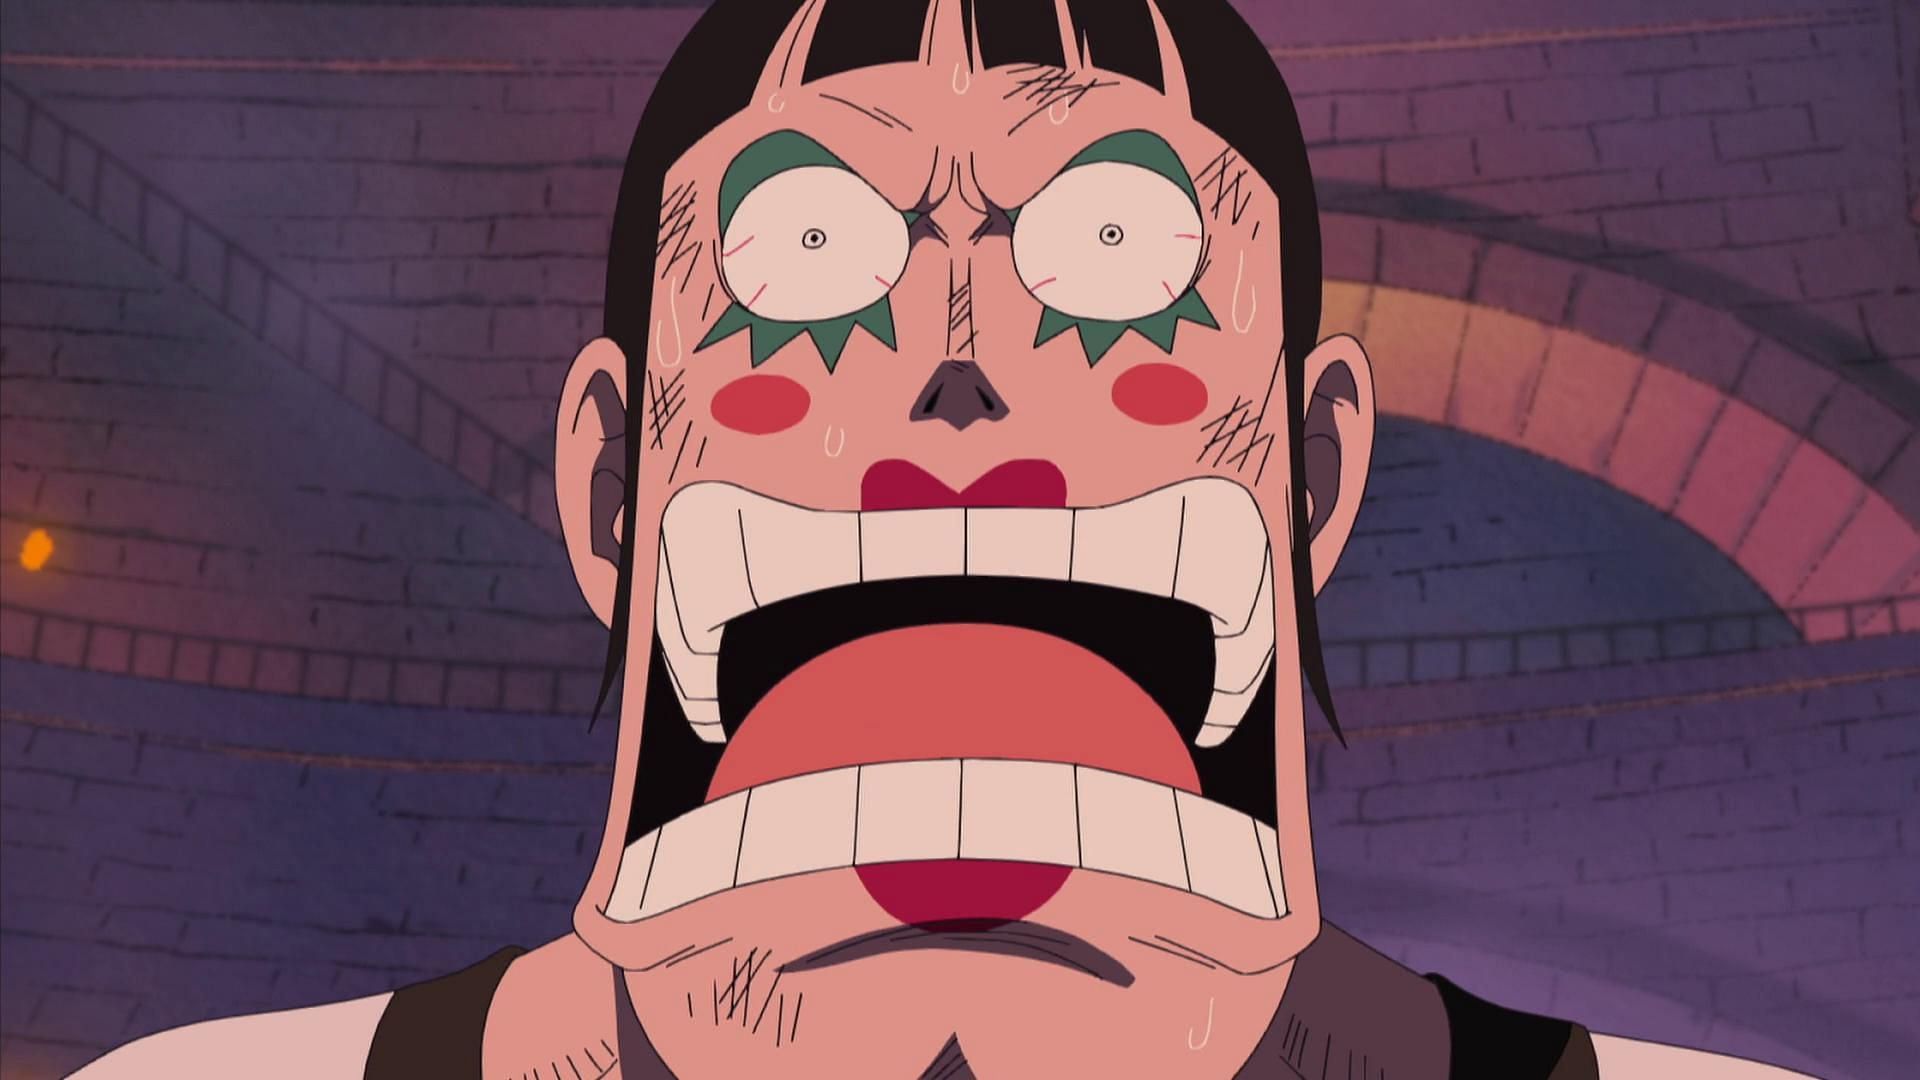 Bon Clay as seen in the One Piece anime (Image via Toei Animation)